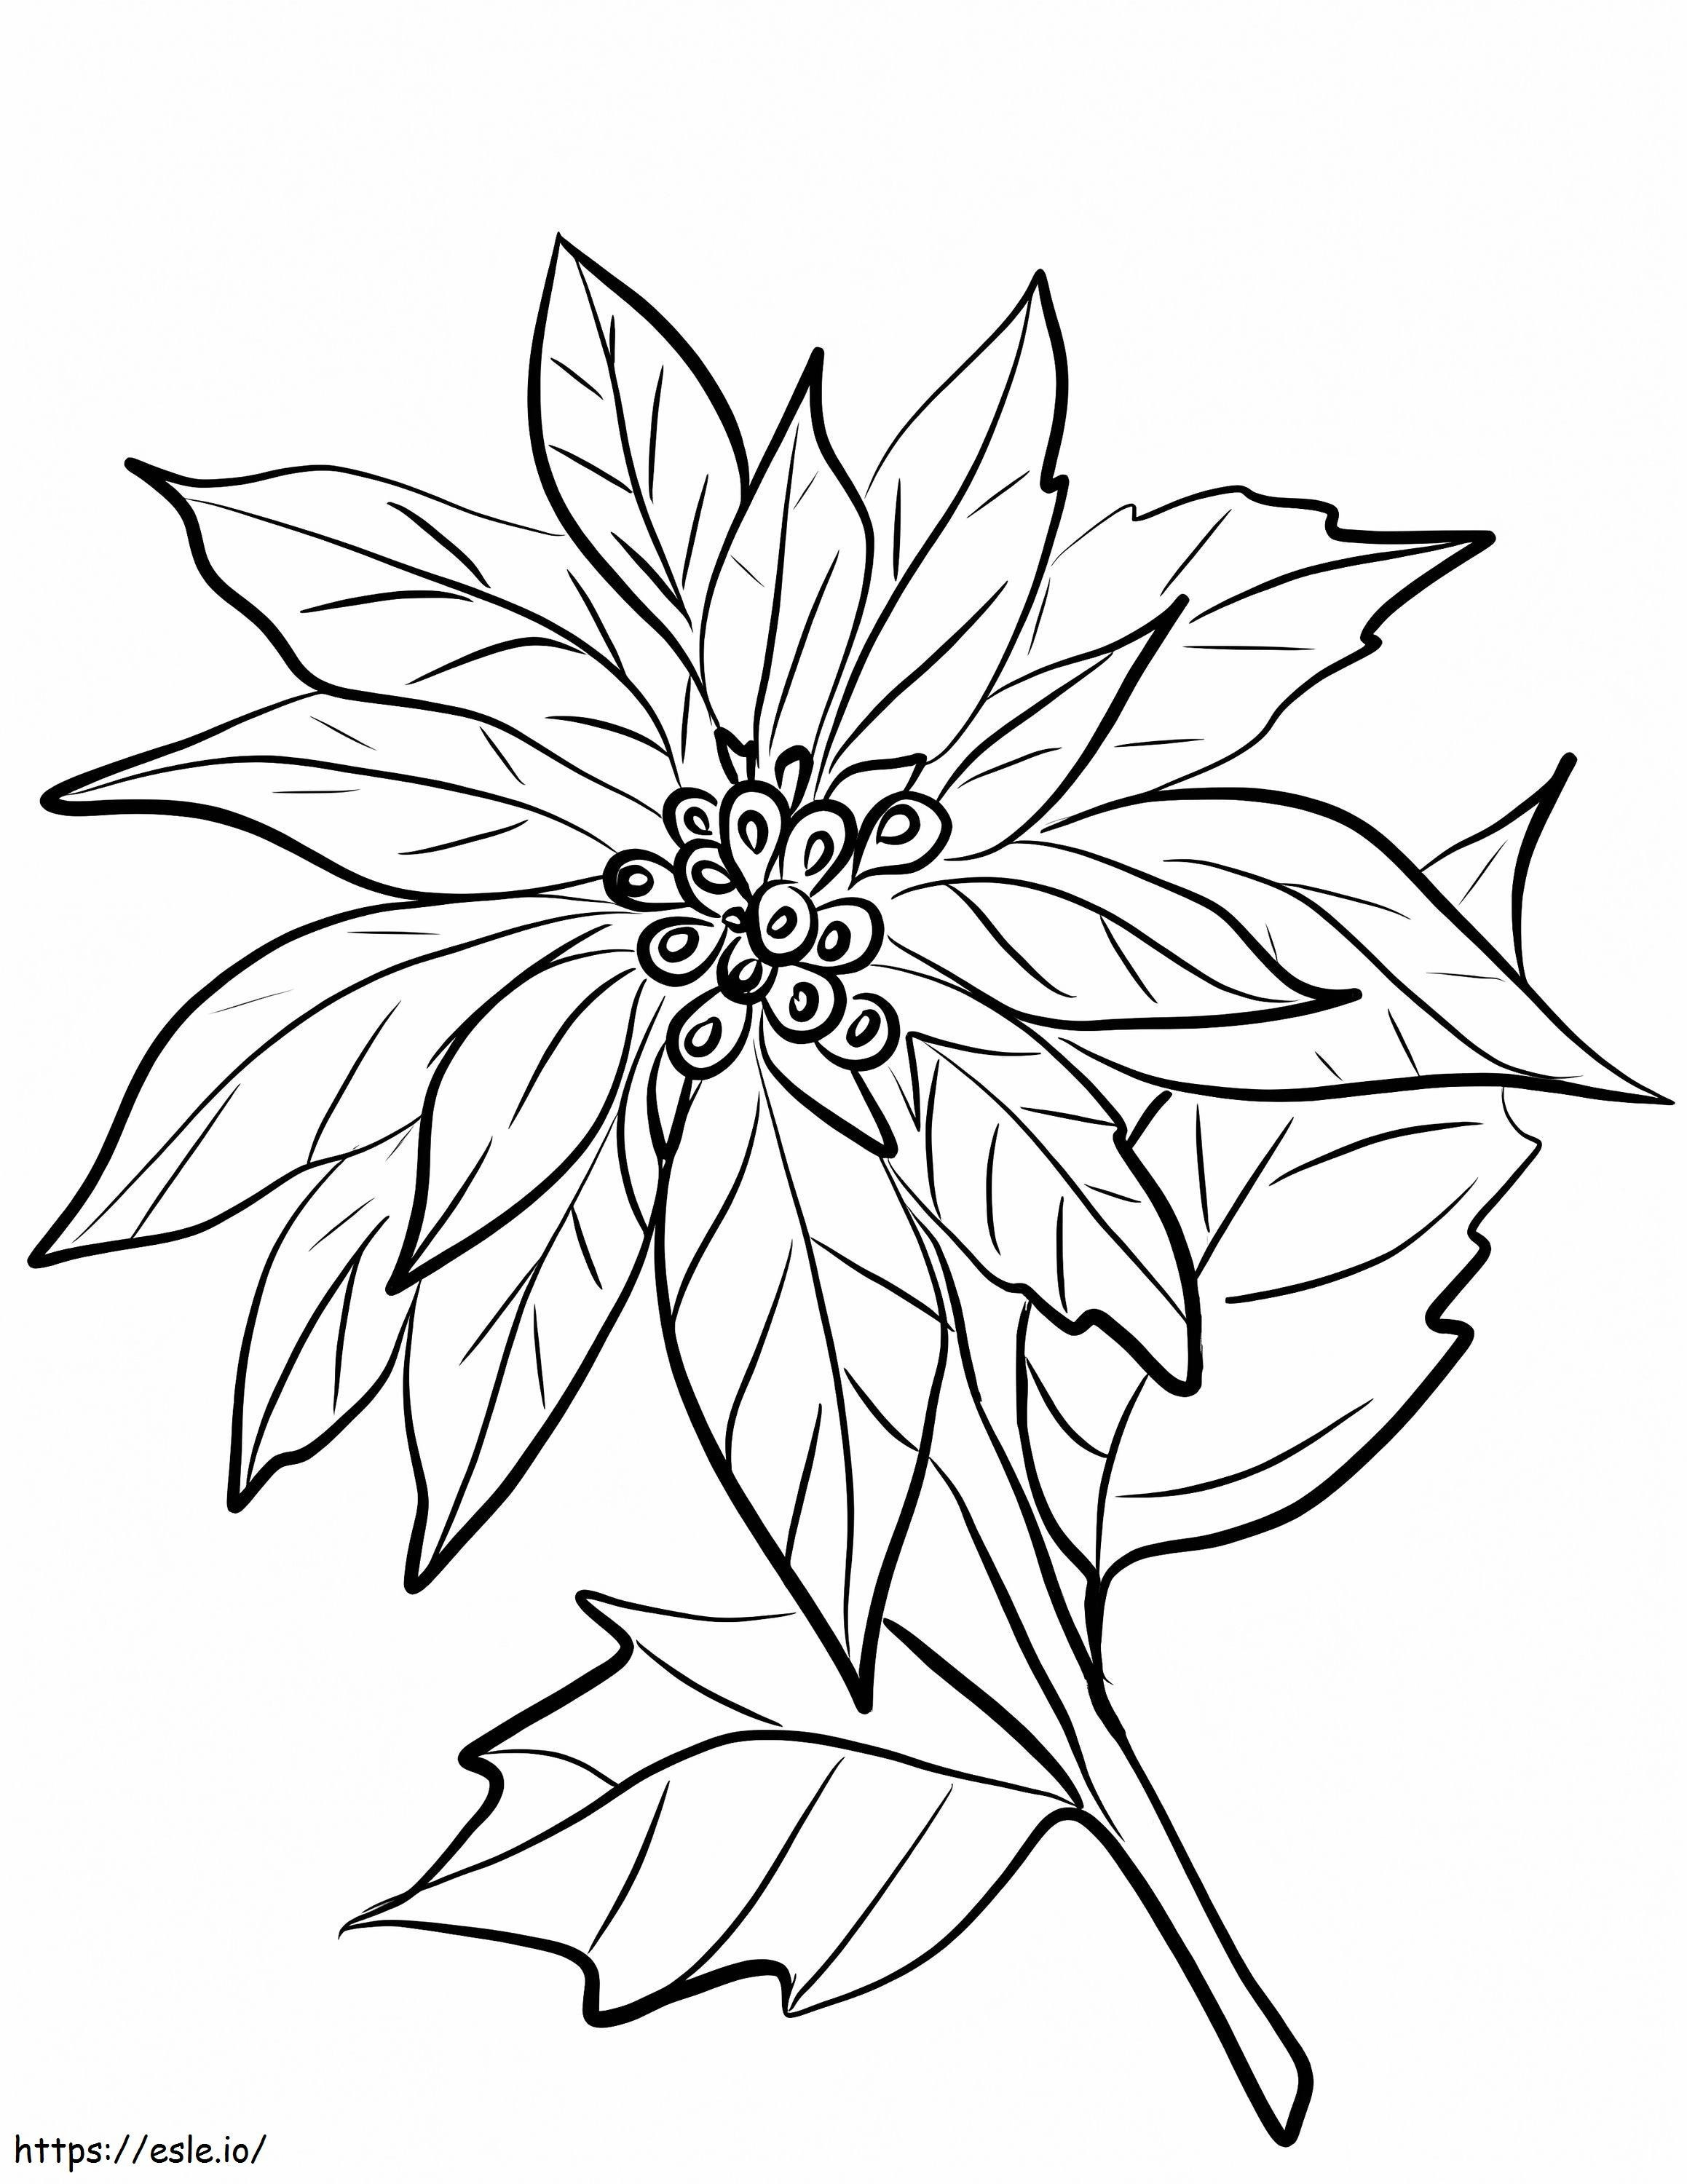 Printable Poinsettia Flower coloring page